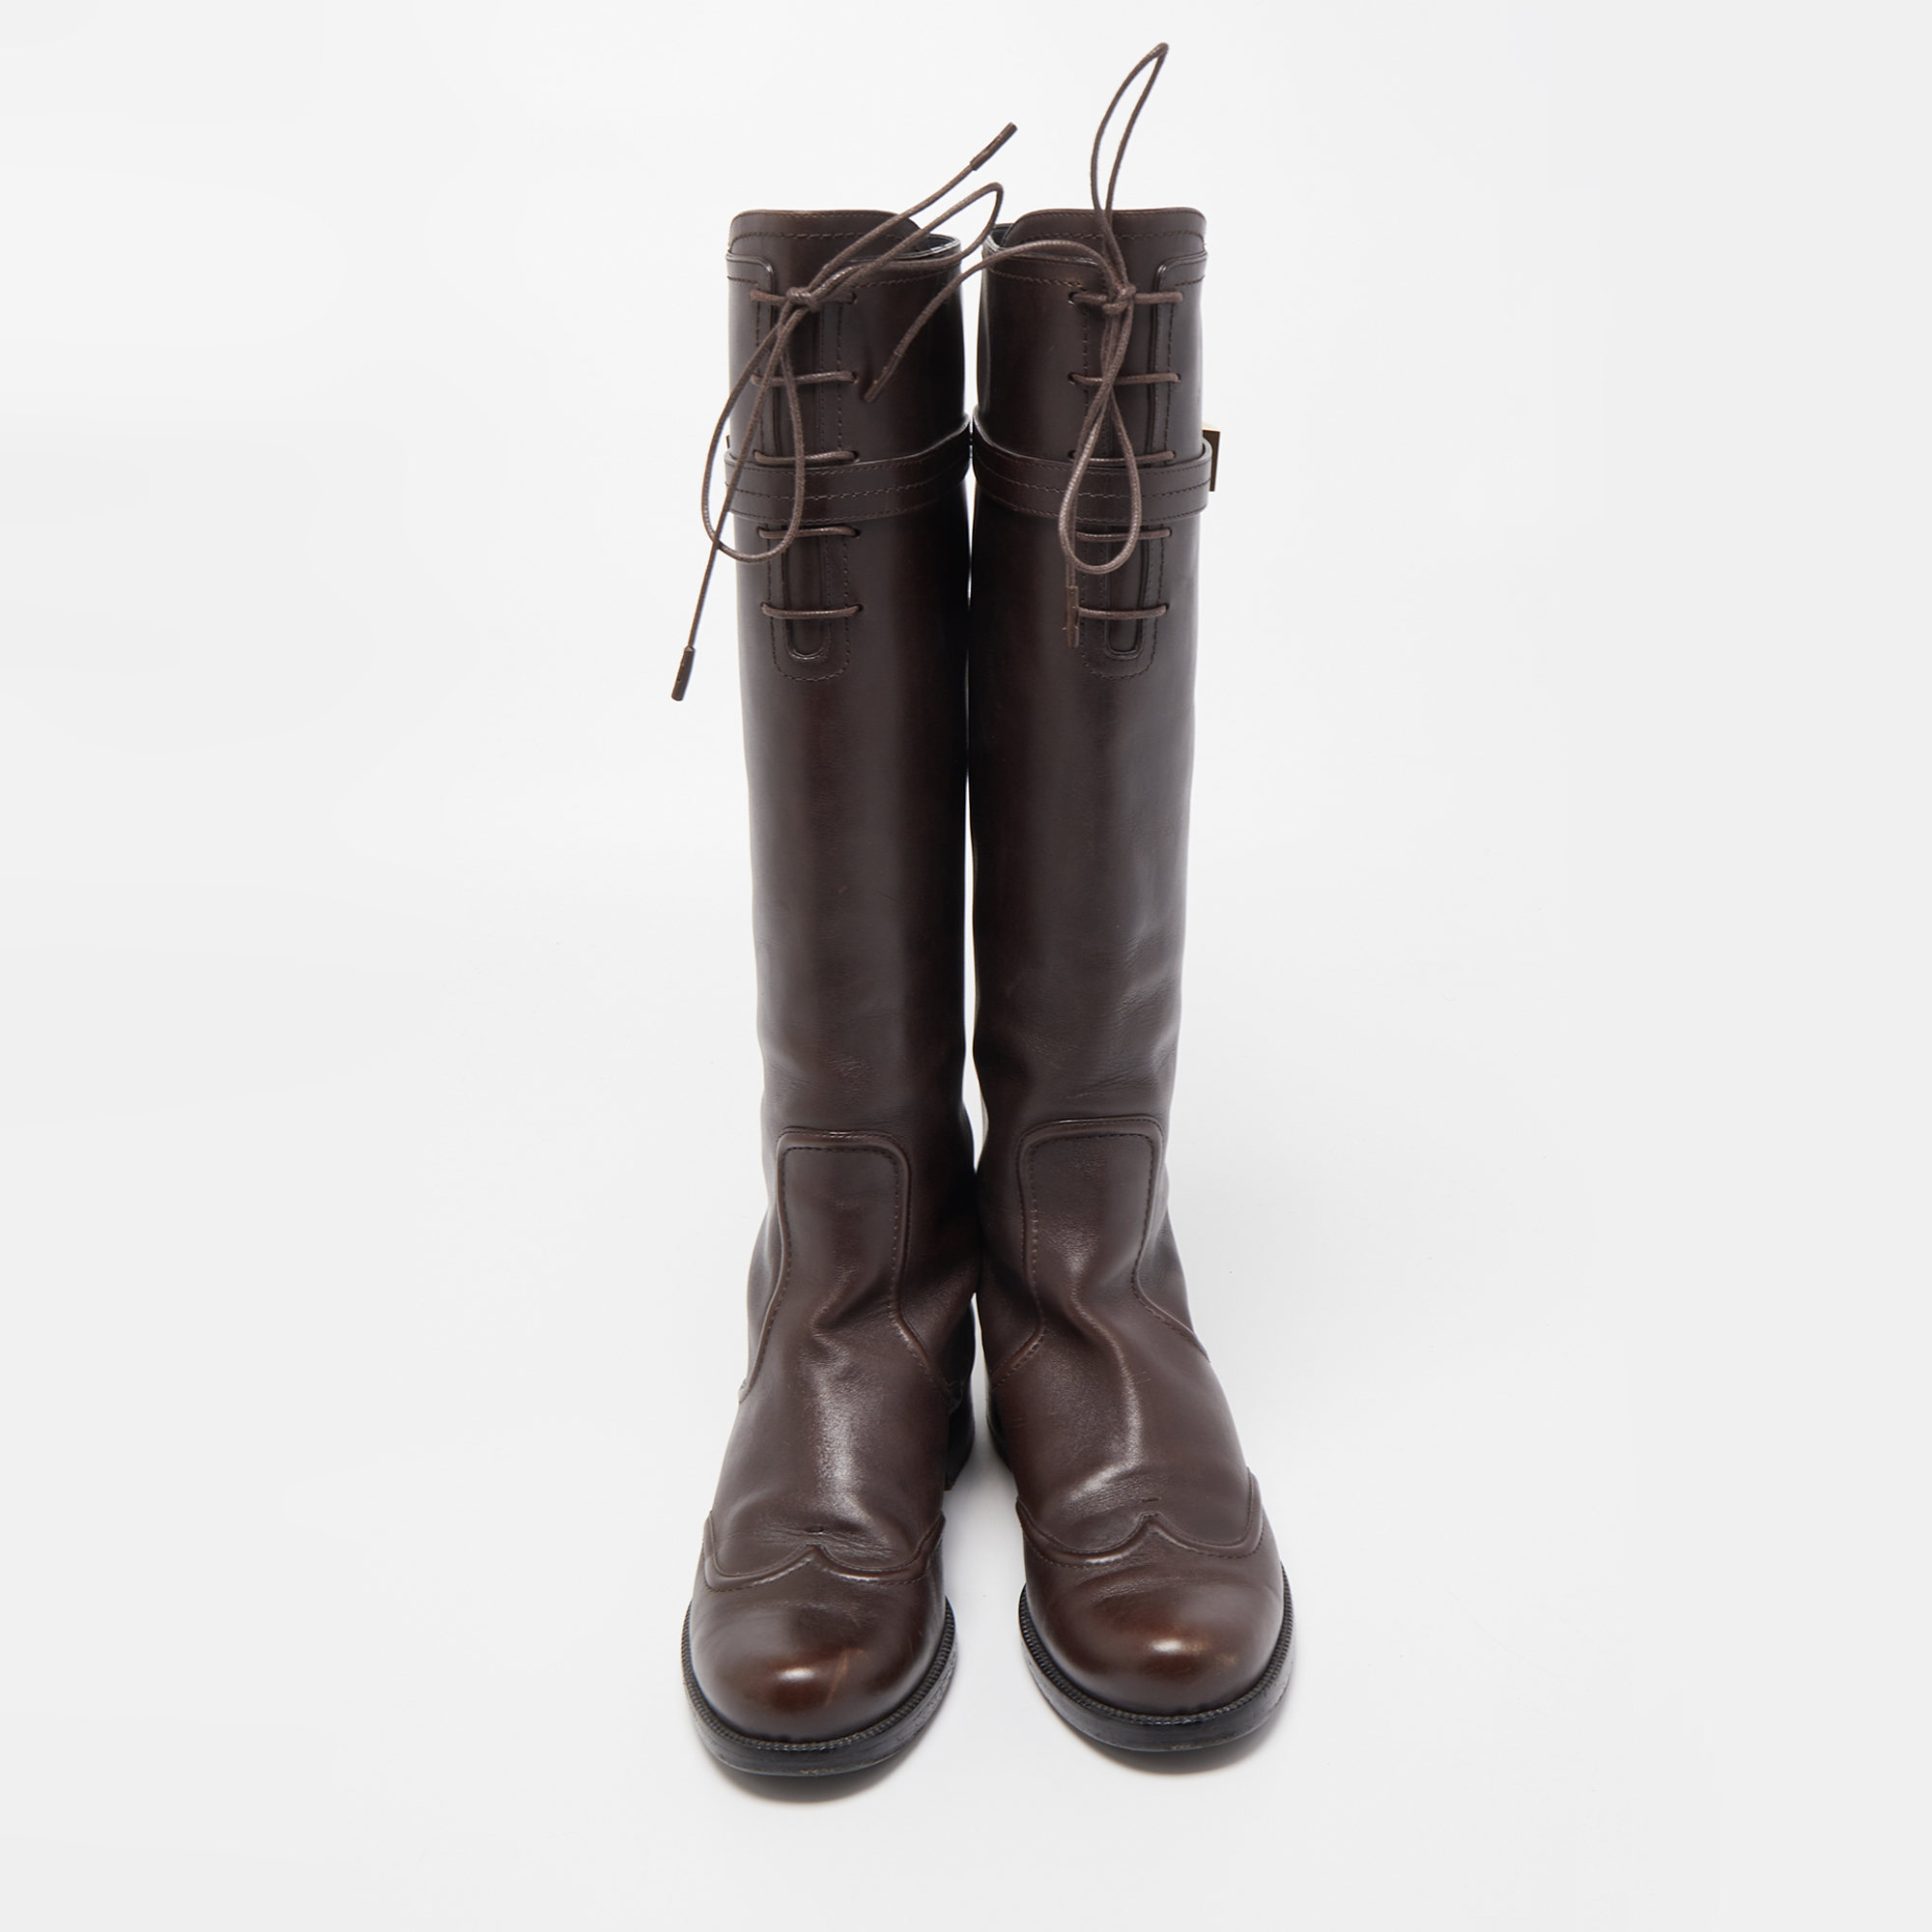 Louis Vuitton Brown Leather Knee Length Boots Size 39